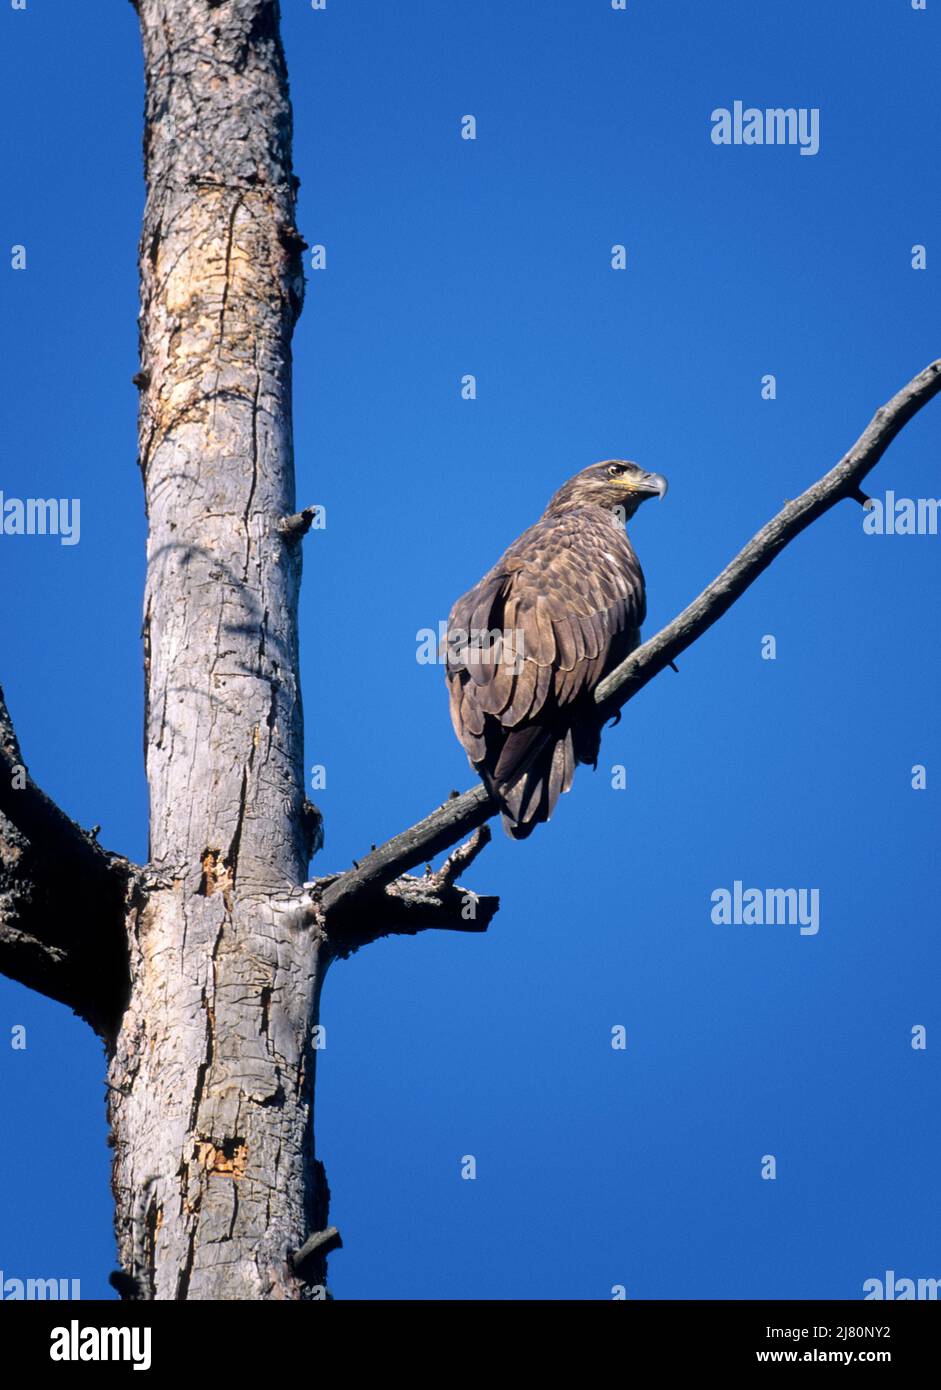 A hawk perched on a tree branch Stock Photo